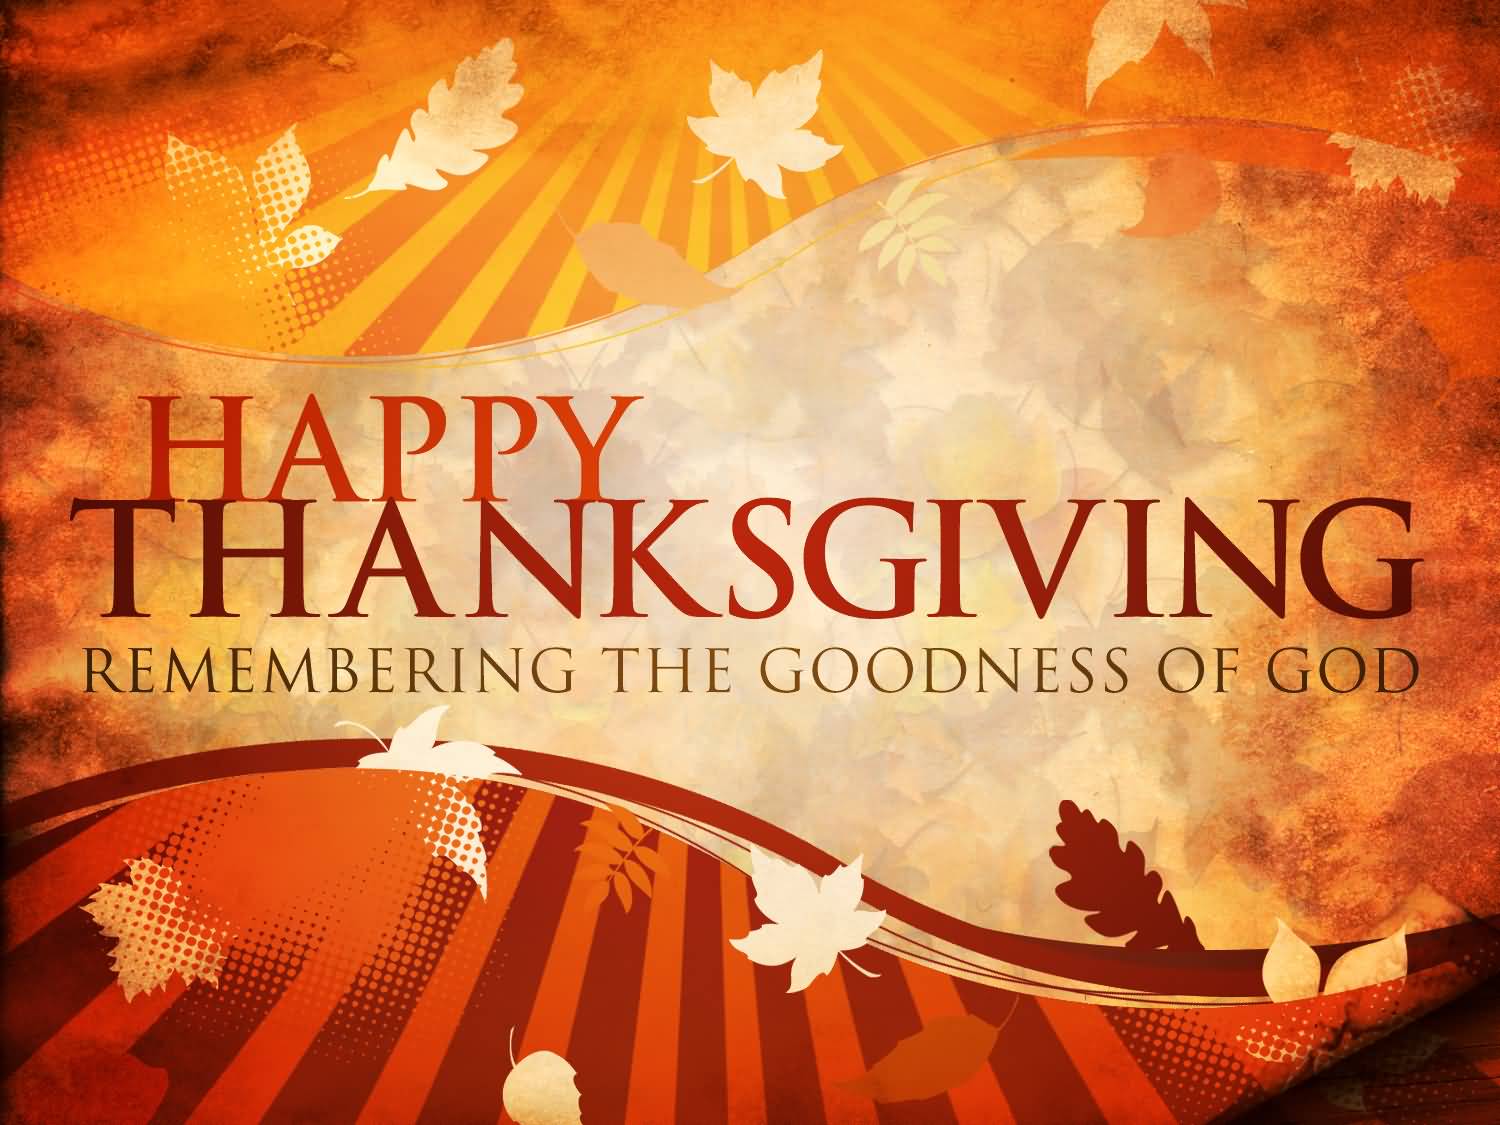 Happy Thanksgiving 2016 Remembering The Goodness Of God